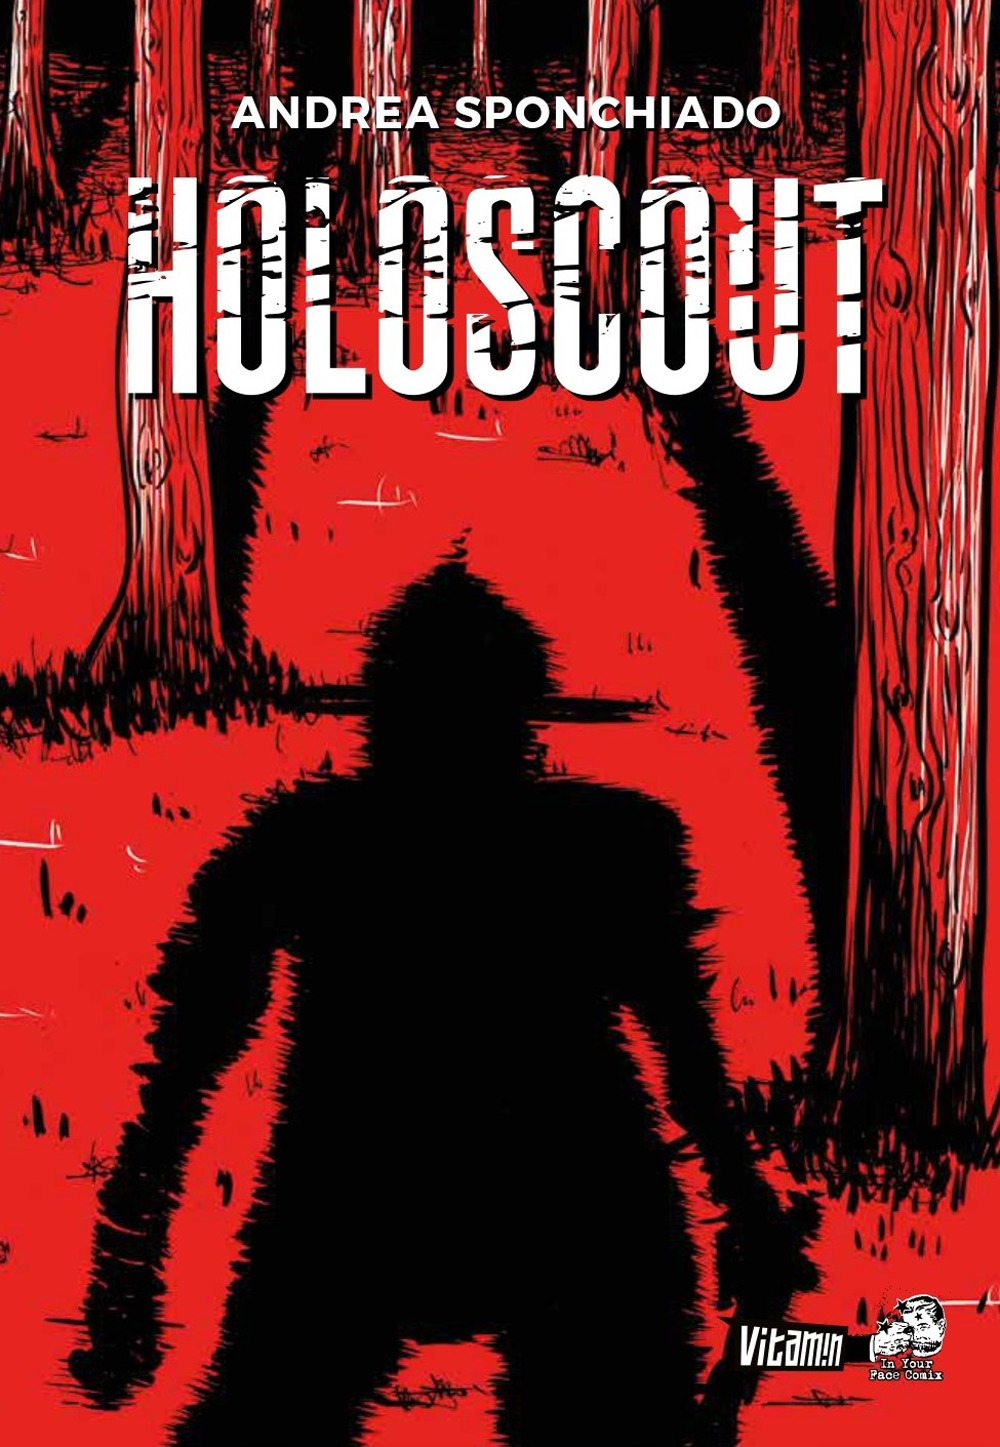 Holoscout